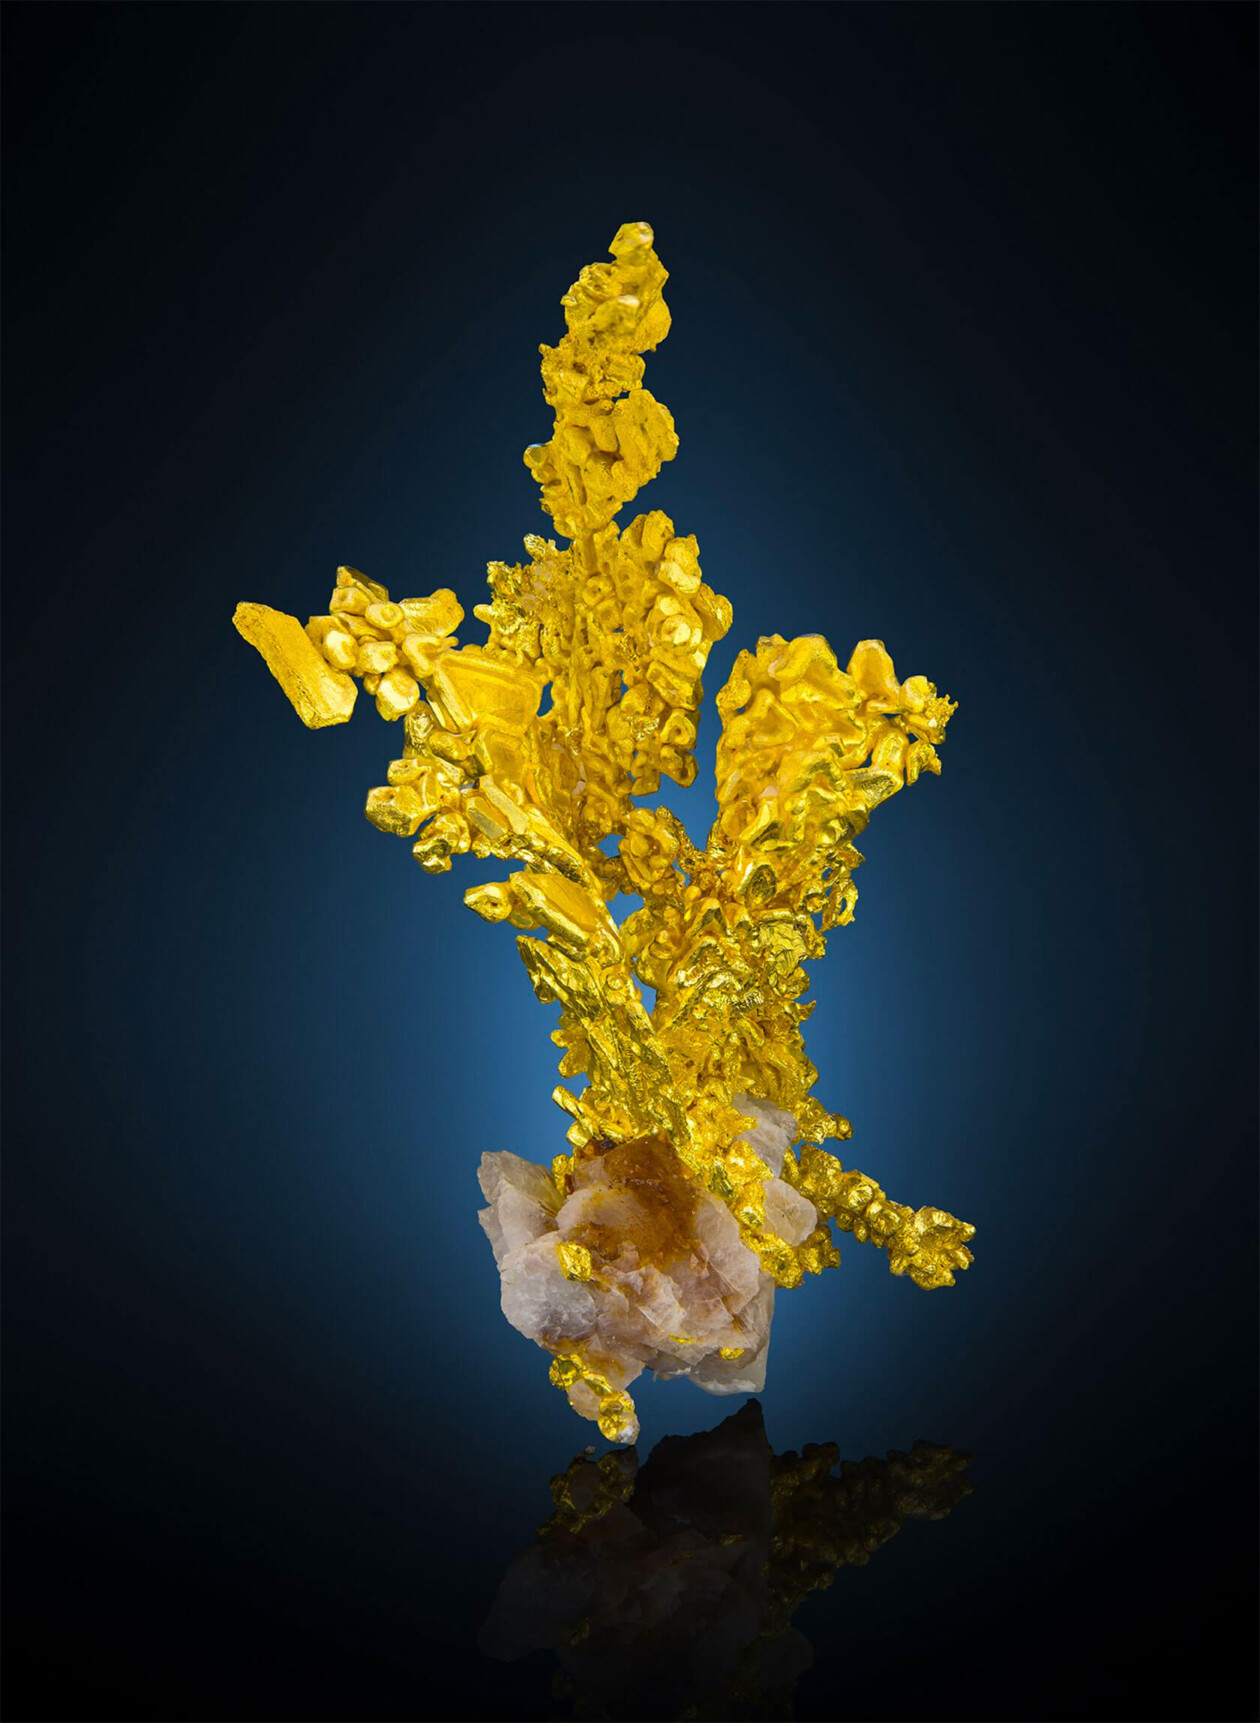 The Magnificent Mineral Photography Of Laszlo Kupi (19)